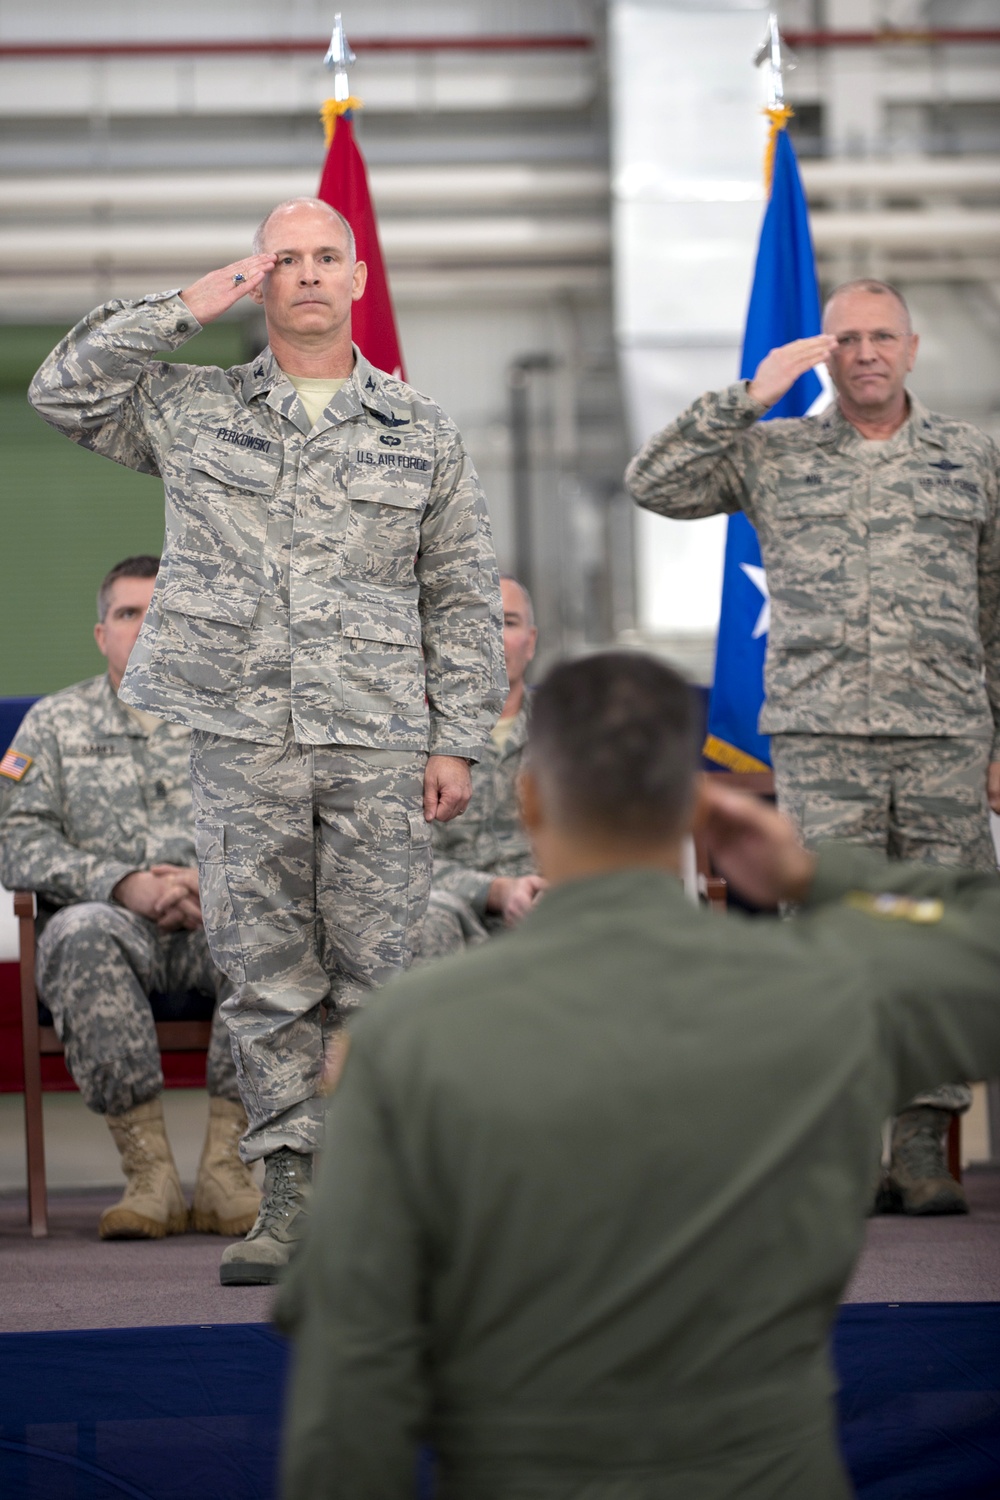 Command ceremony held at 167th Airlift Wing